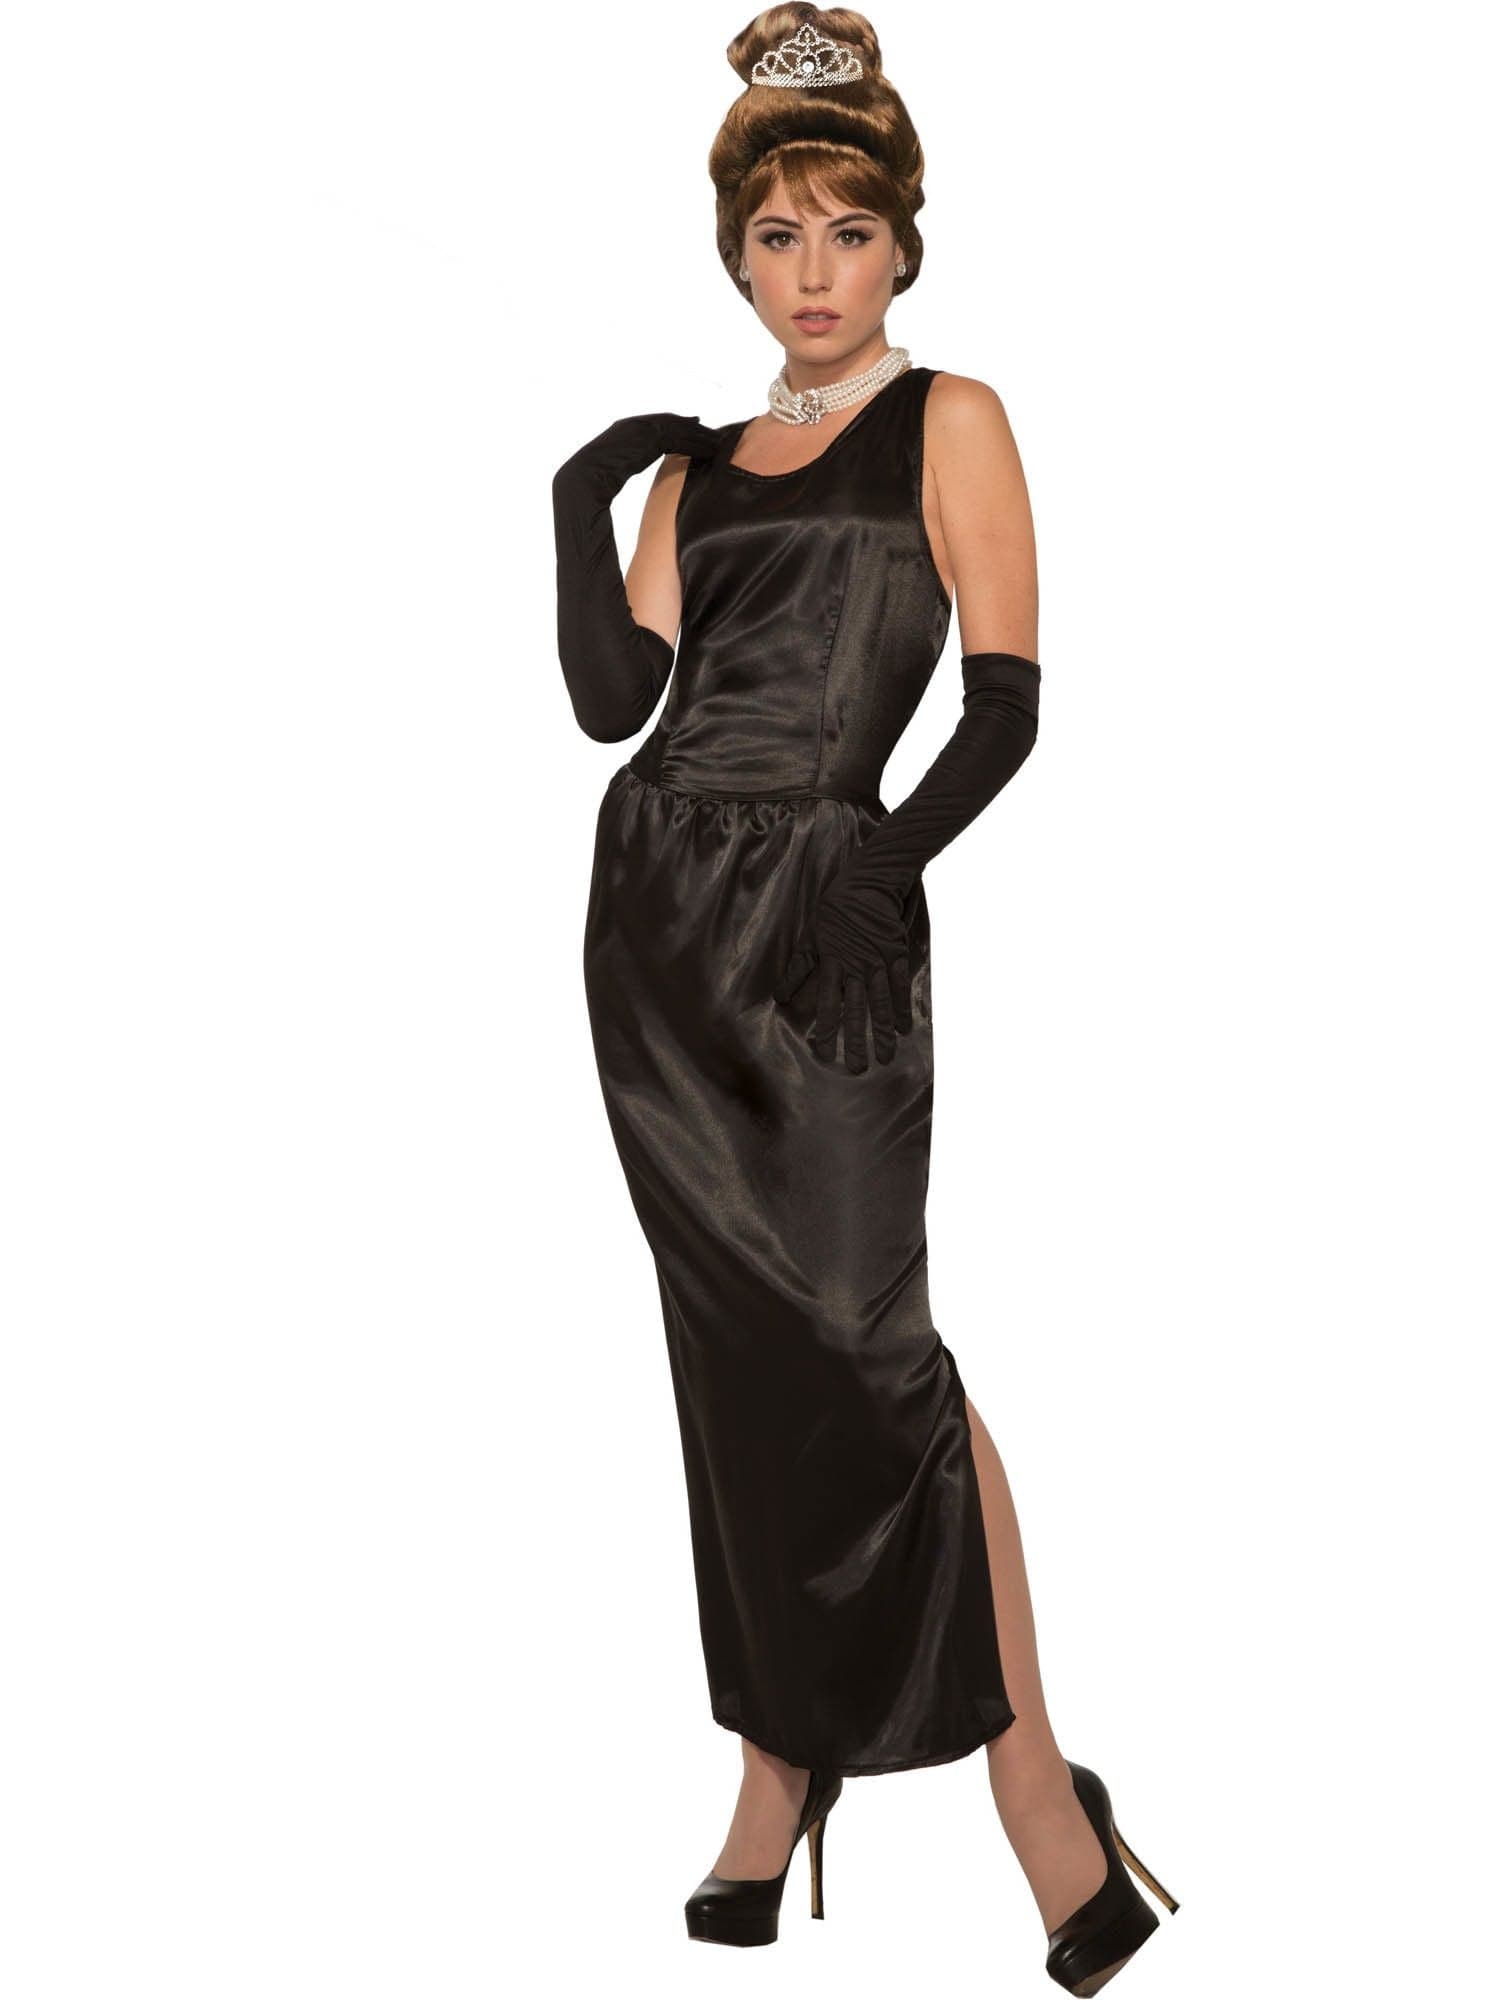 Adult Breakfast At Tiffany's Gown W/Gloves Costume - costumes.com